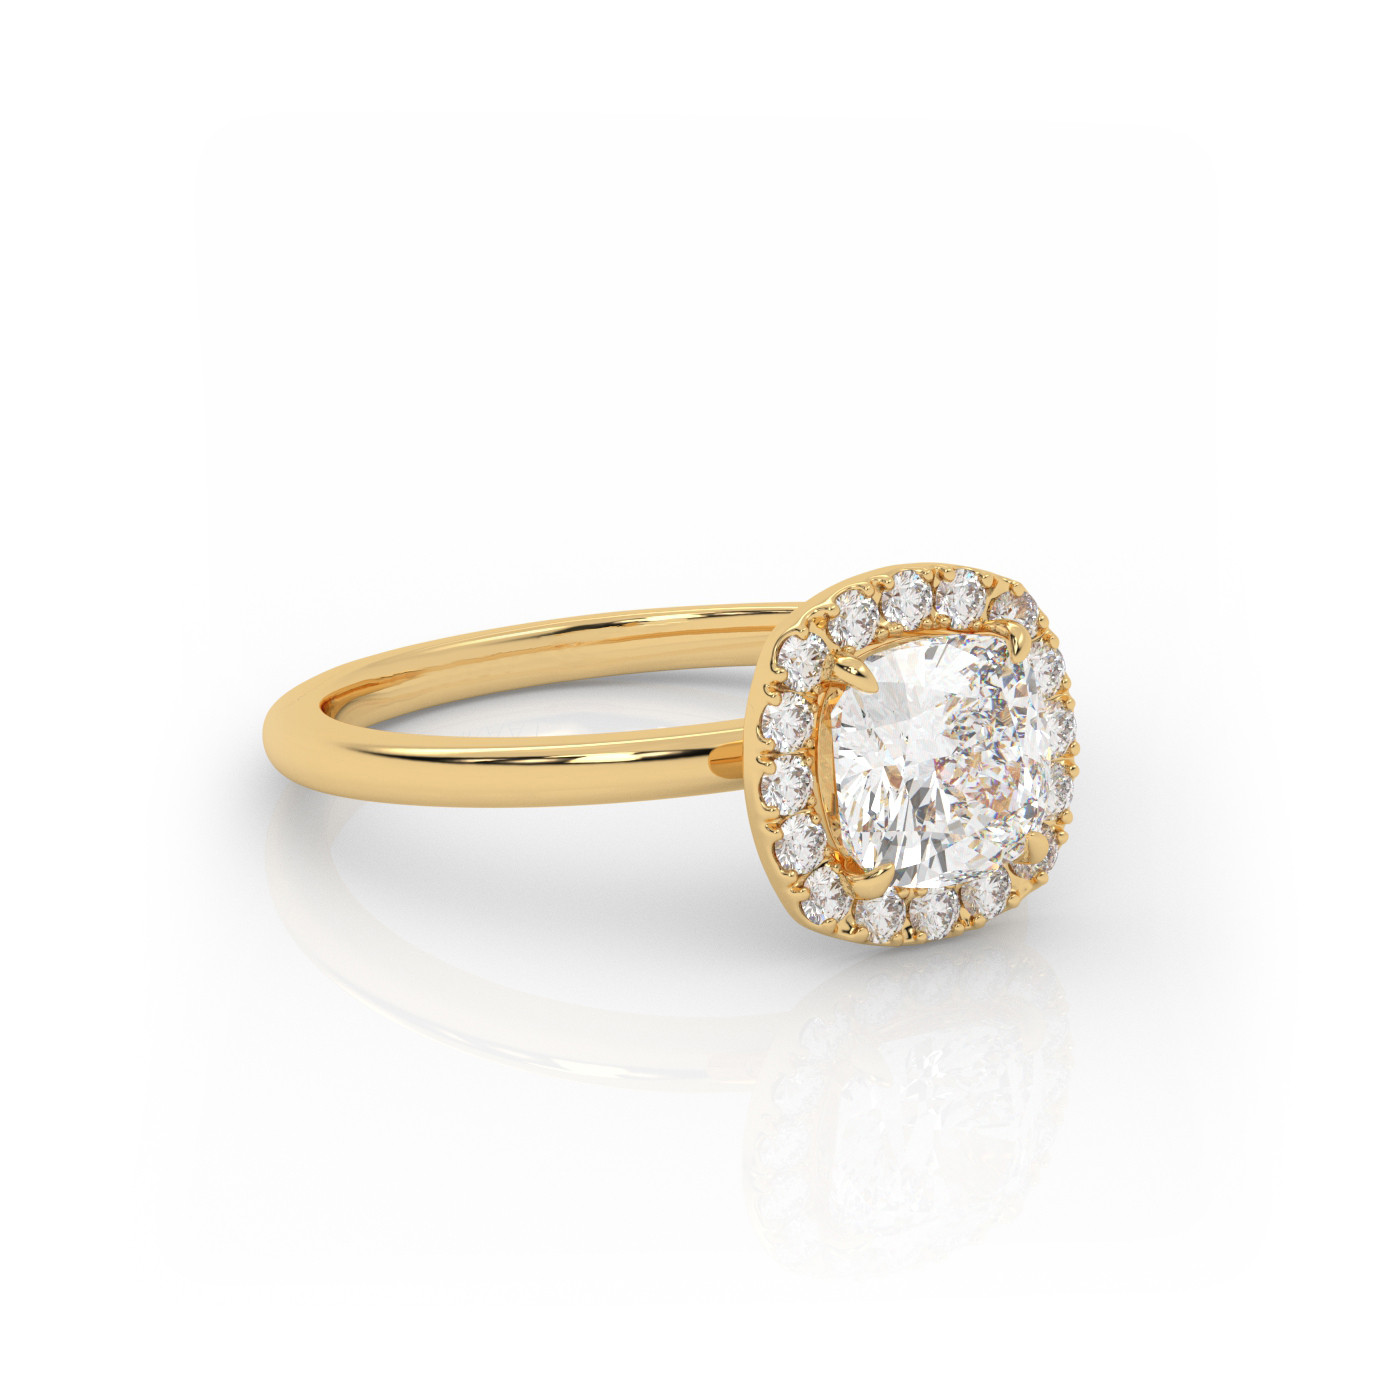 18K YELLOW GOLD Cushion Cut Engagement Ring with Halo Style